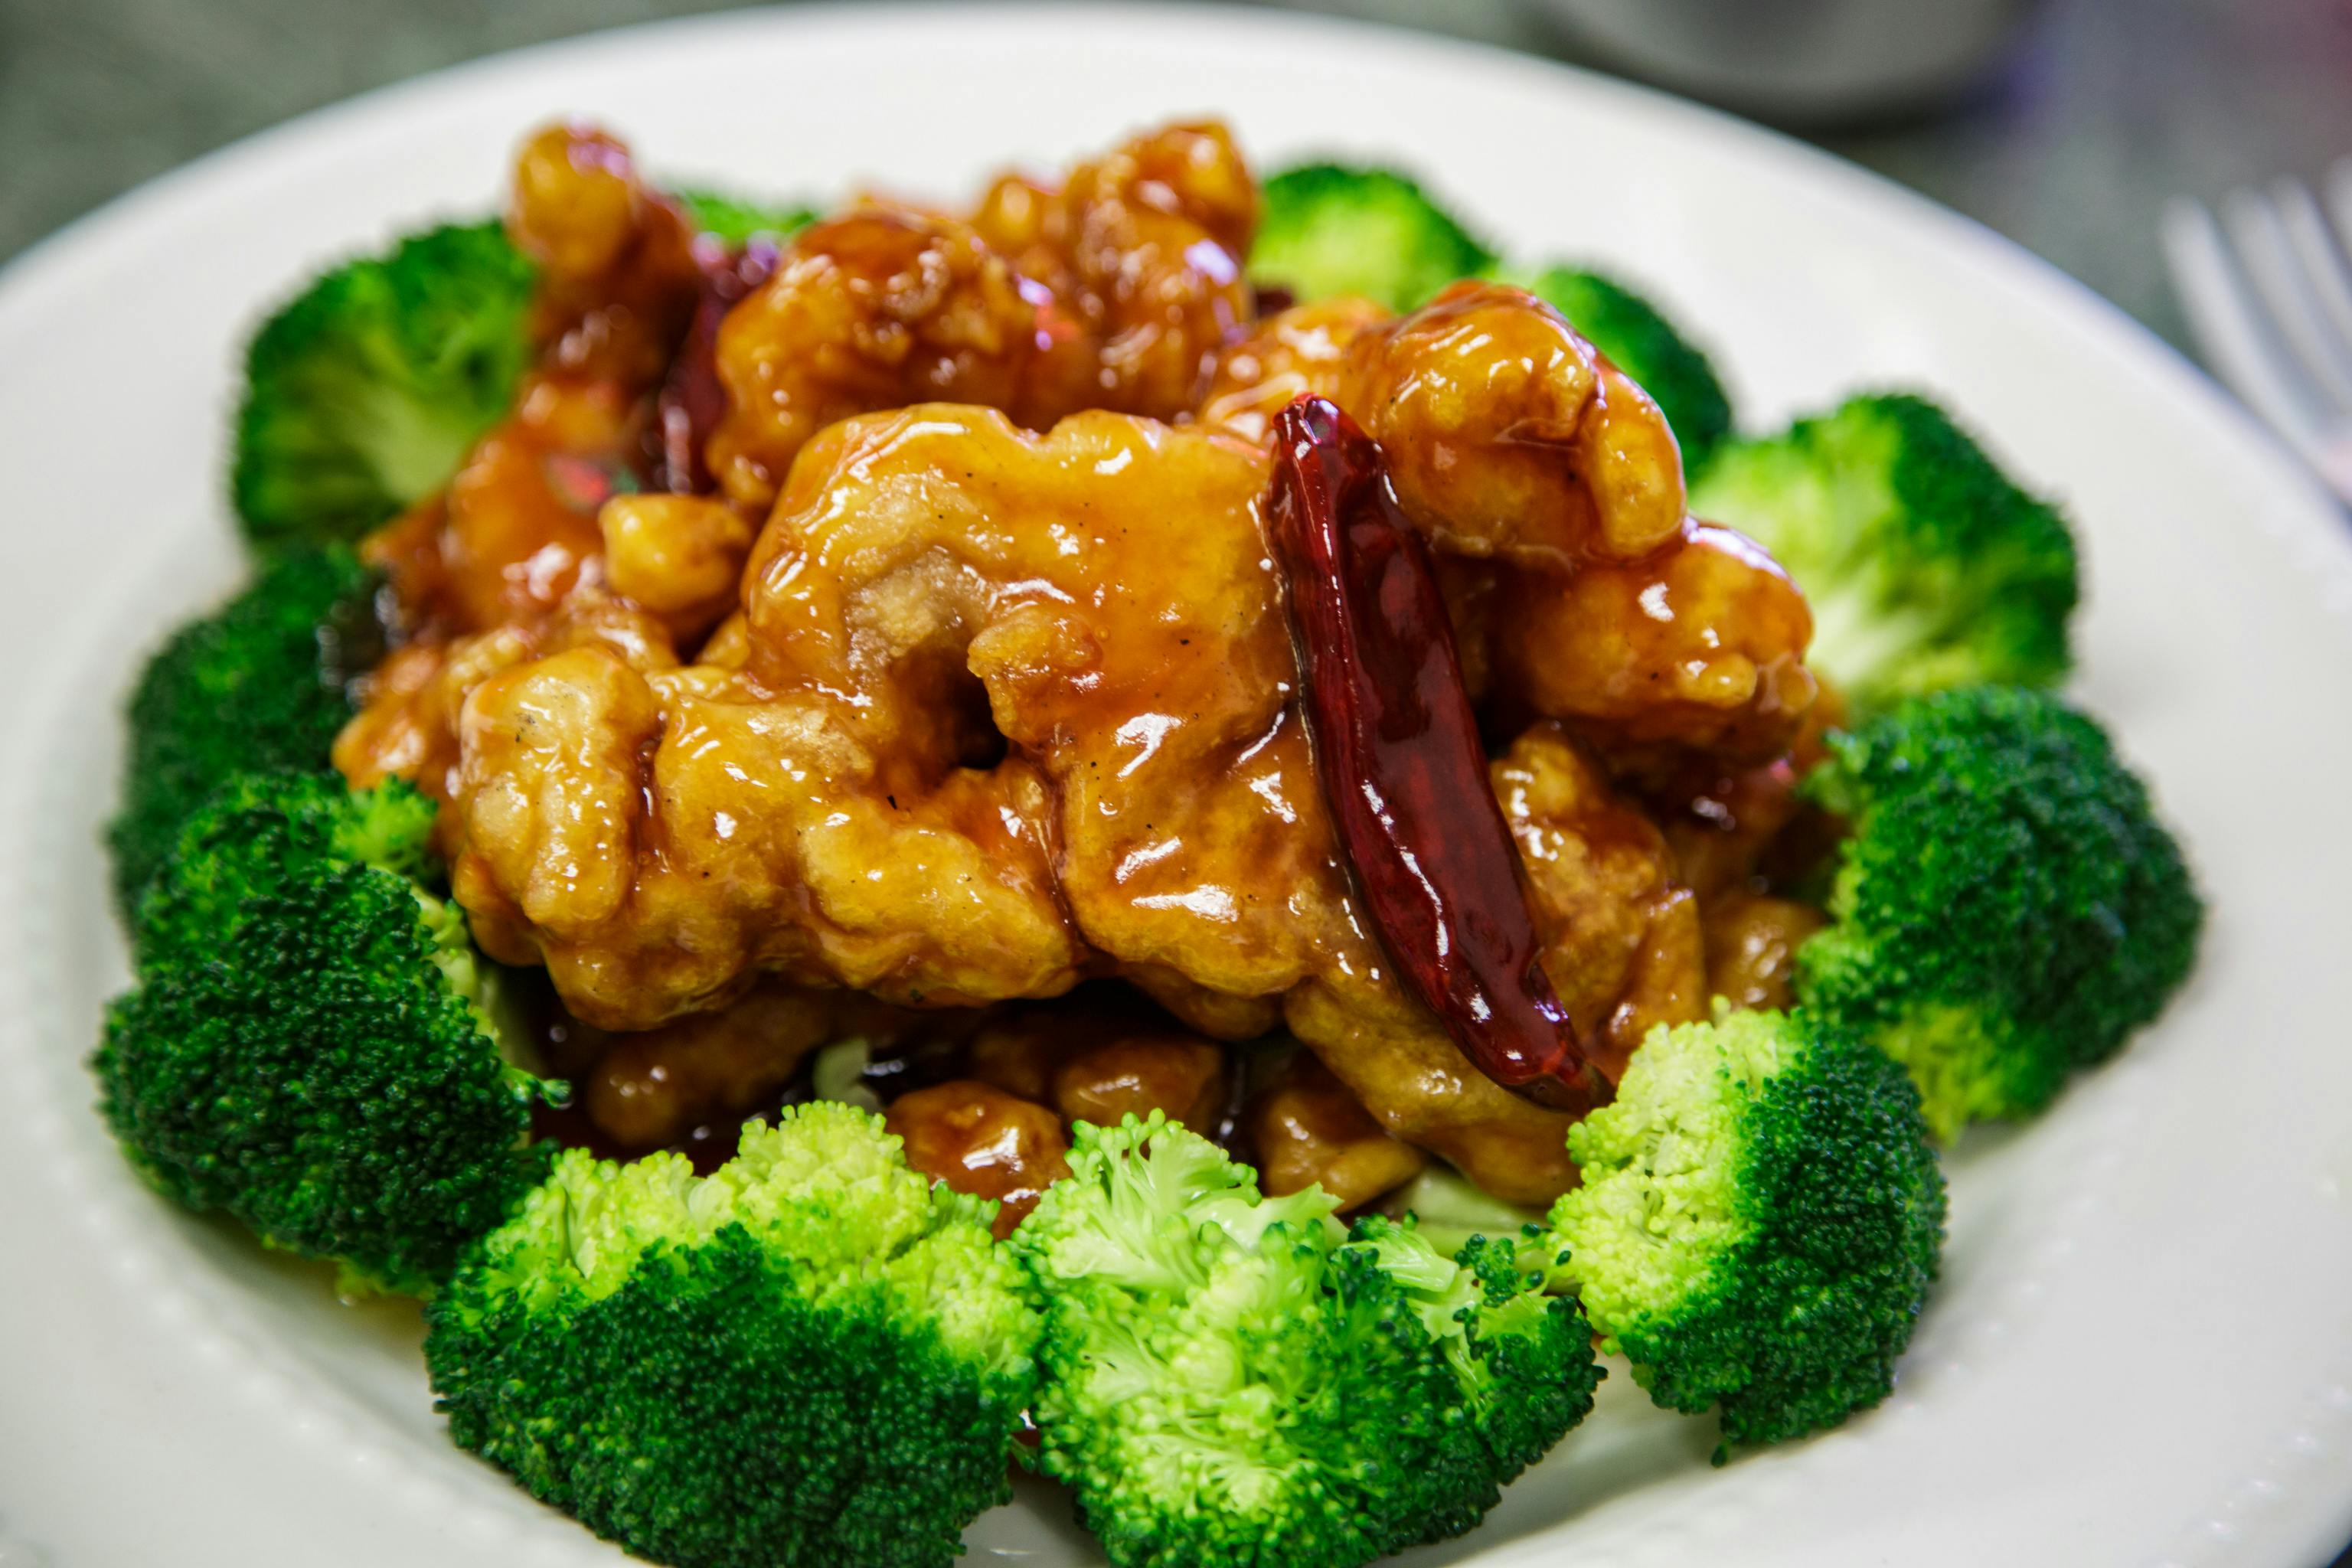 S7. General Tso's Chicken from China Wok in Madison, WI